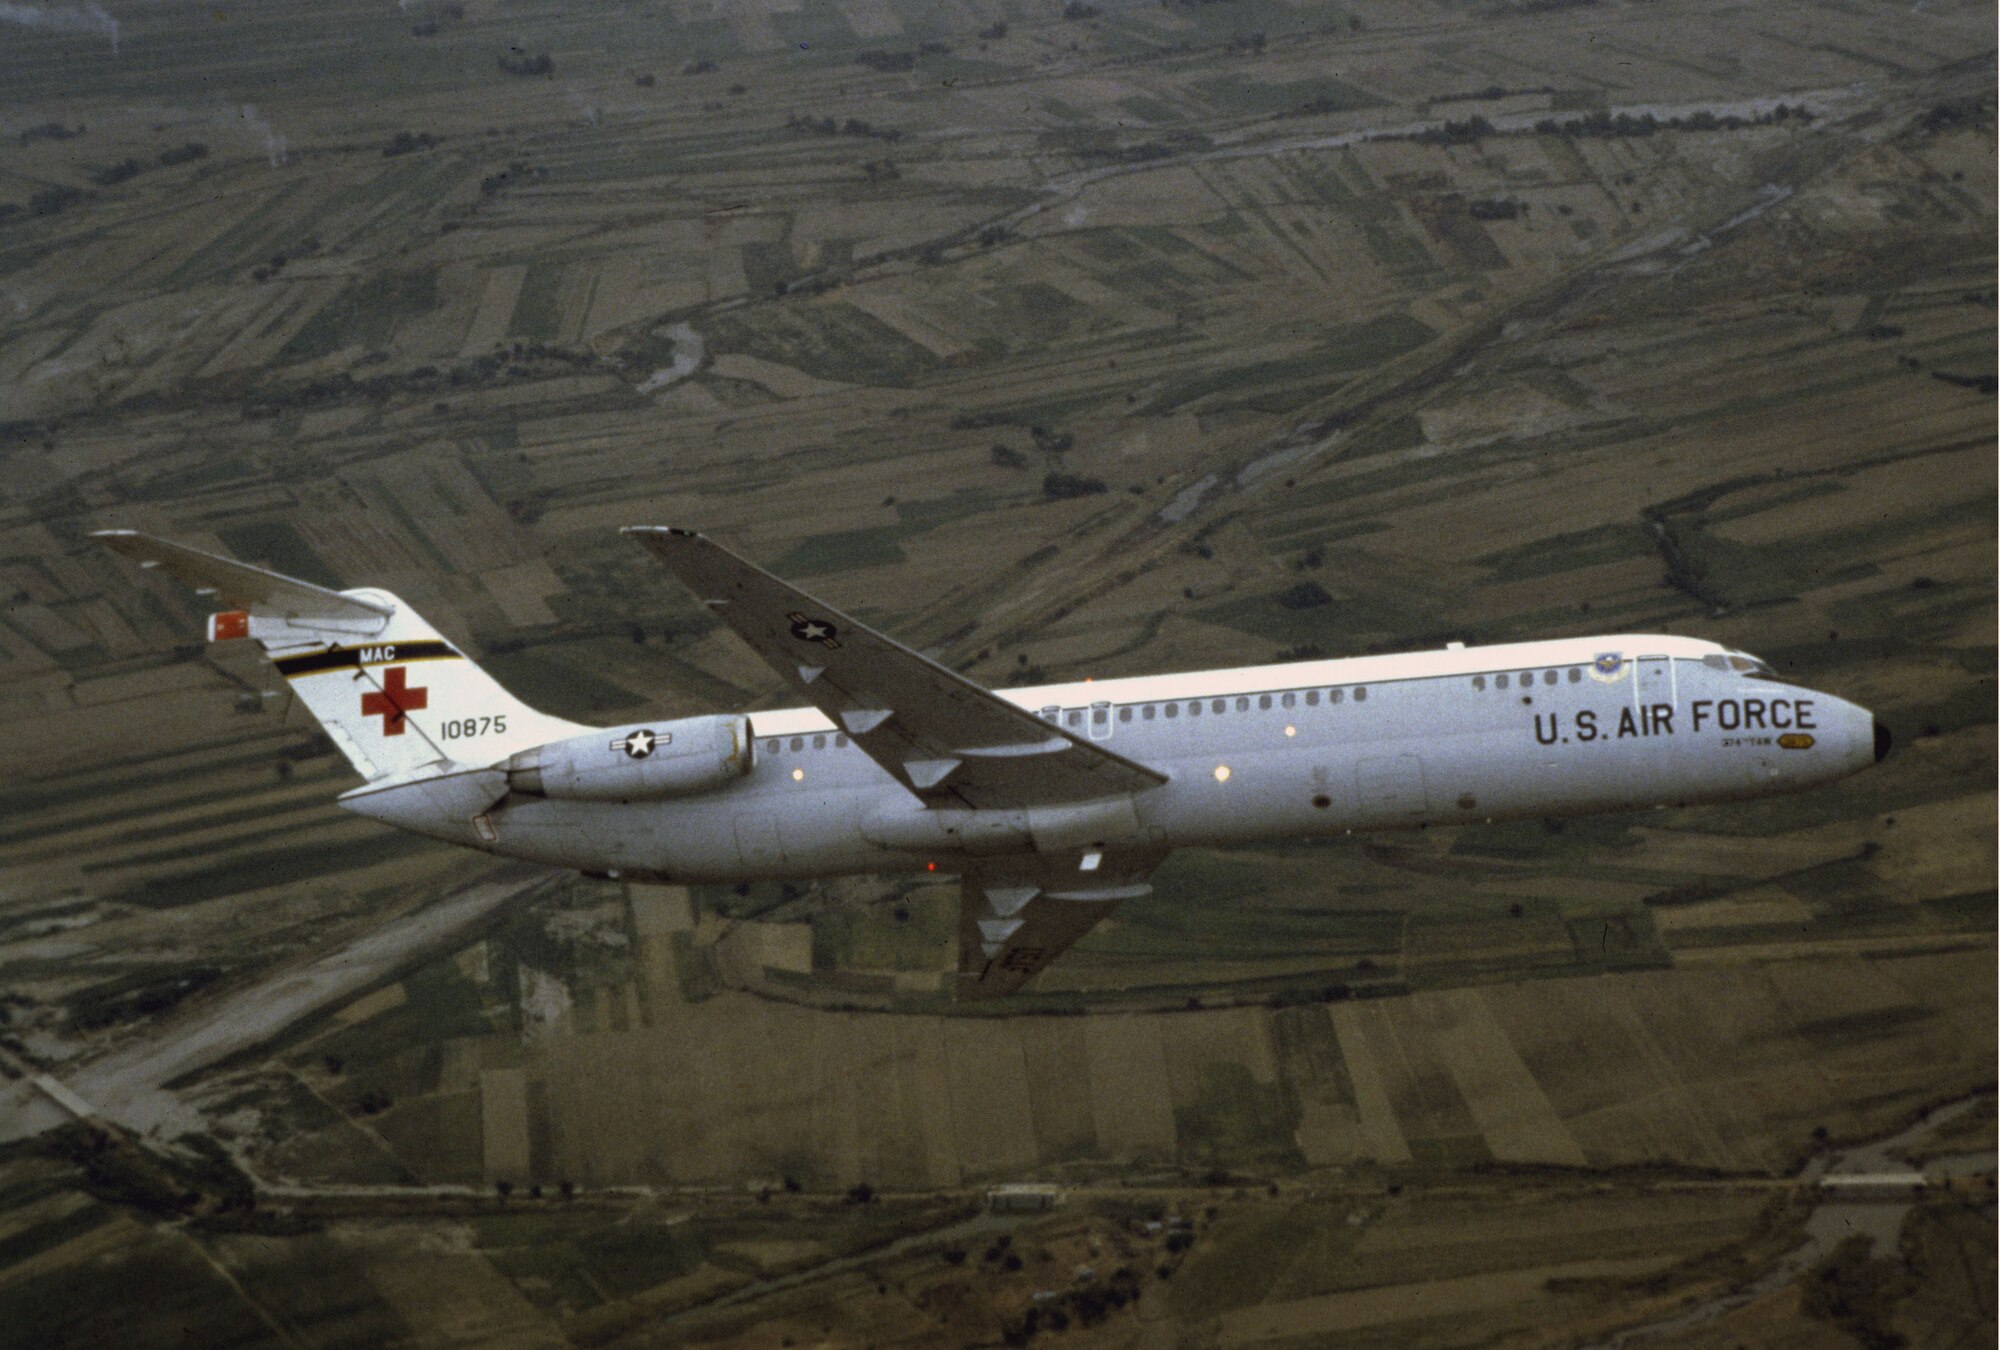 The C-9A Nightingale, the first plane designed for aeromedical evacuation, became part of the Air Force inventory in August 1968. (U.S. Air Force photo)